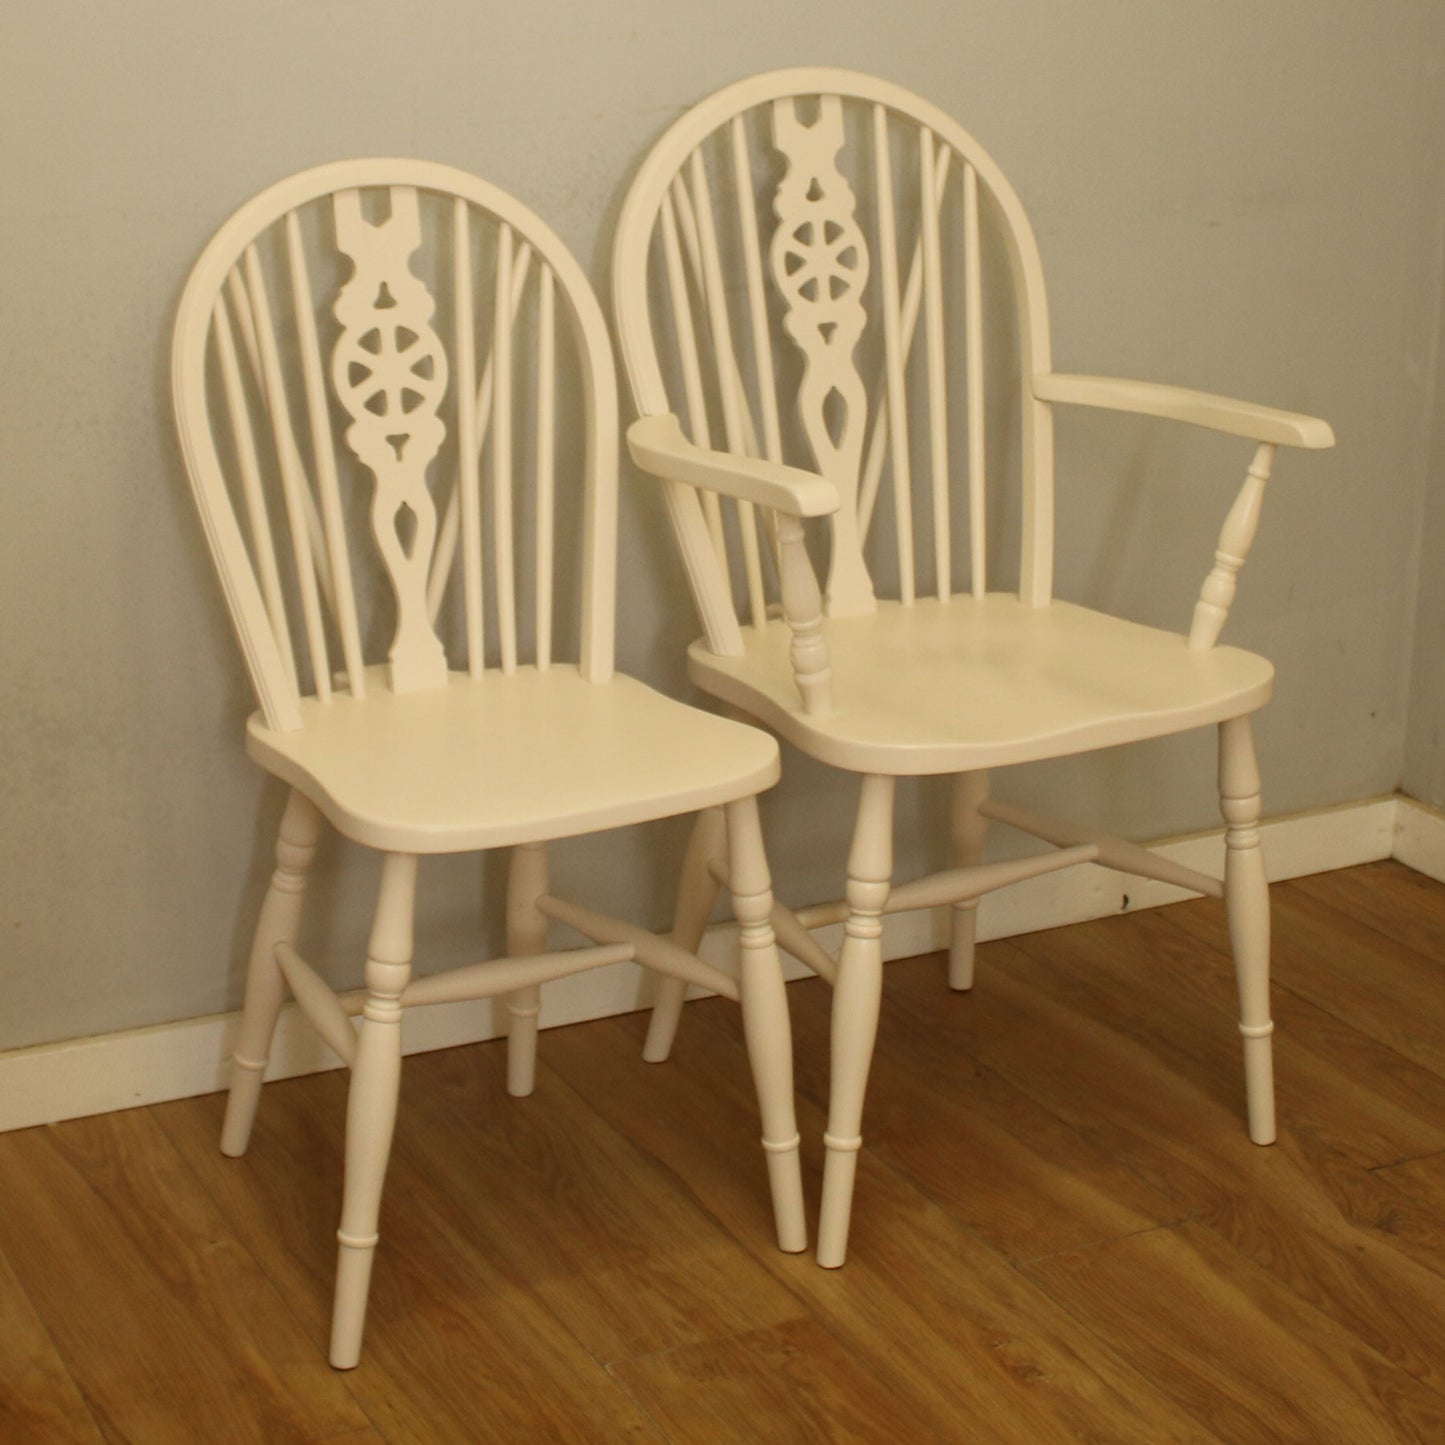 Painted Oak Drop-Leaf Table and Four Chairs